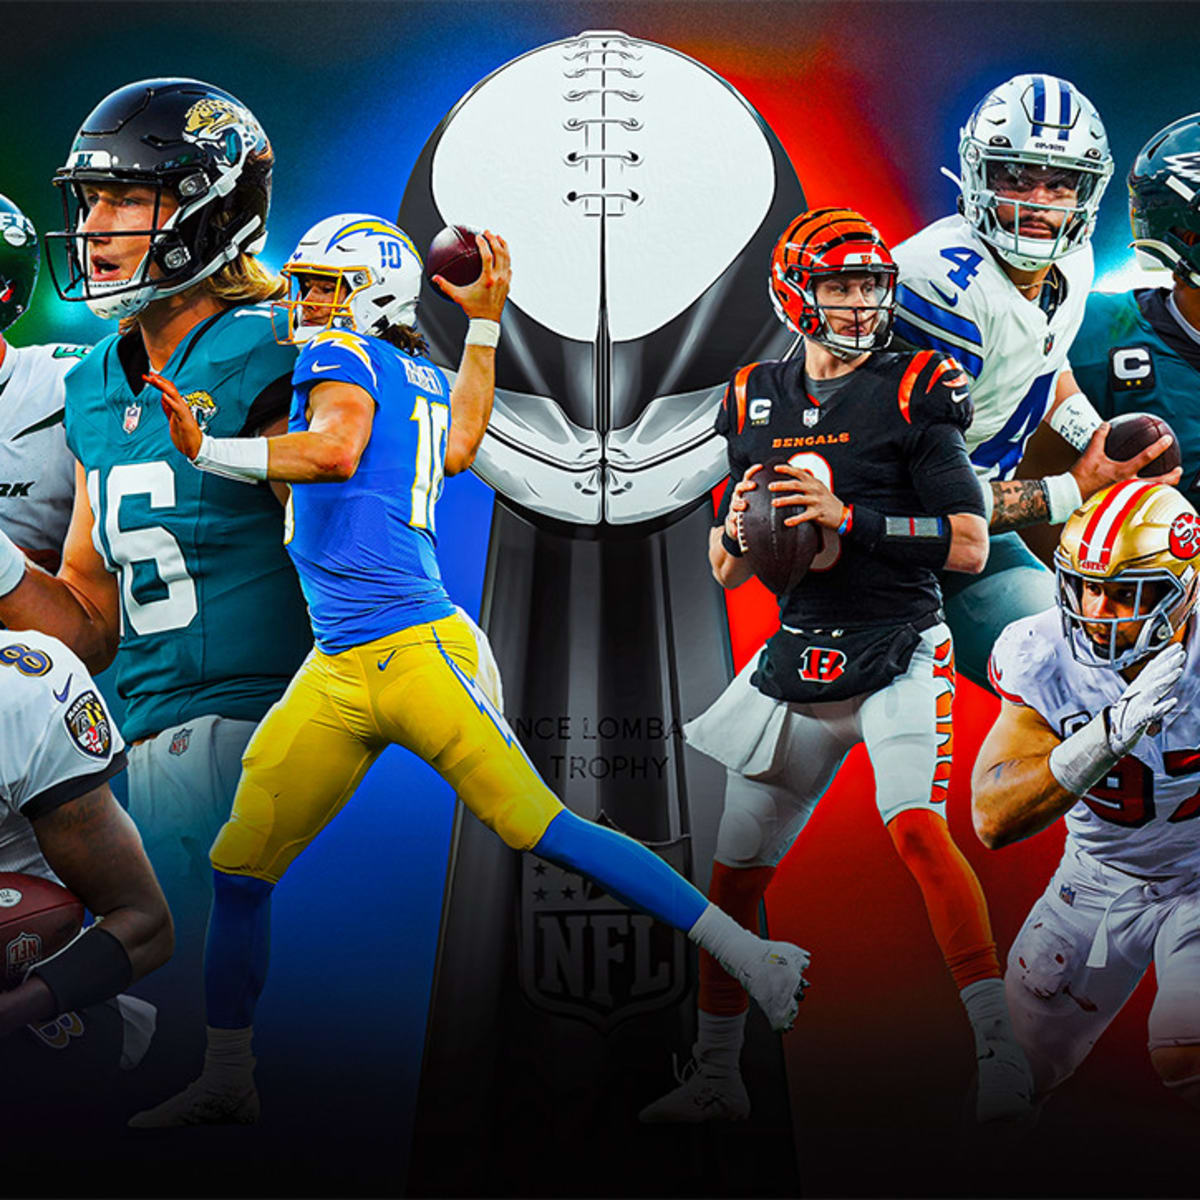 Free NFL Picks & Predictions 2023 - Football Best Bets Today